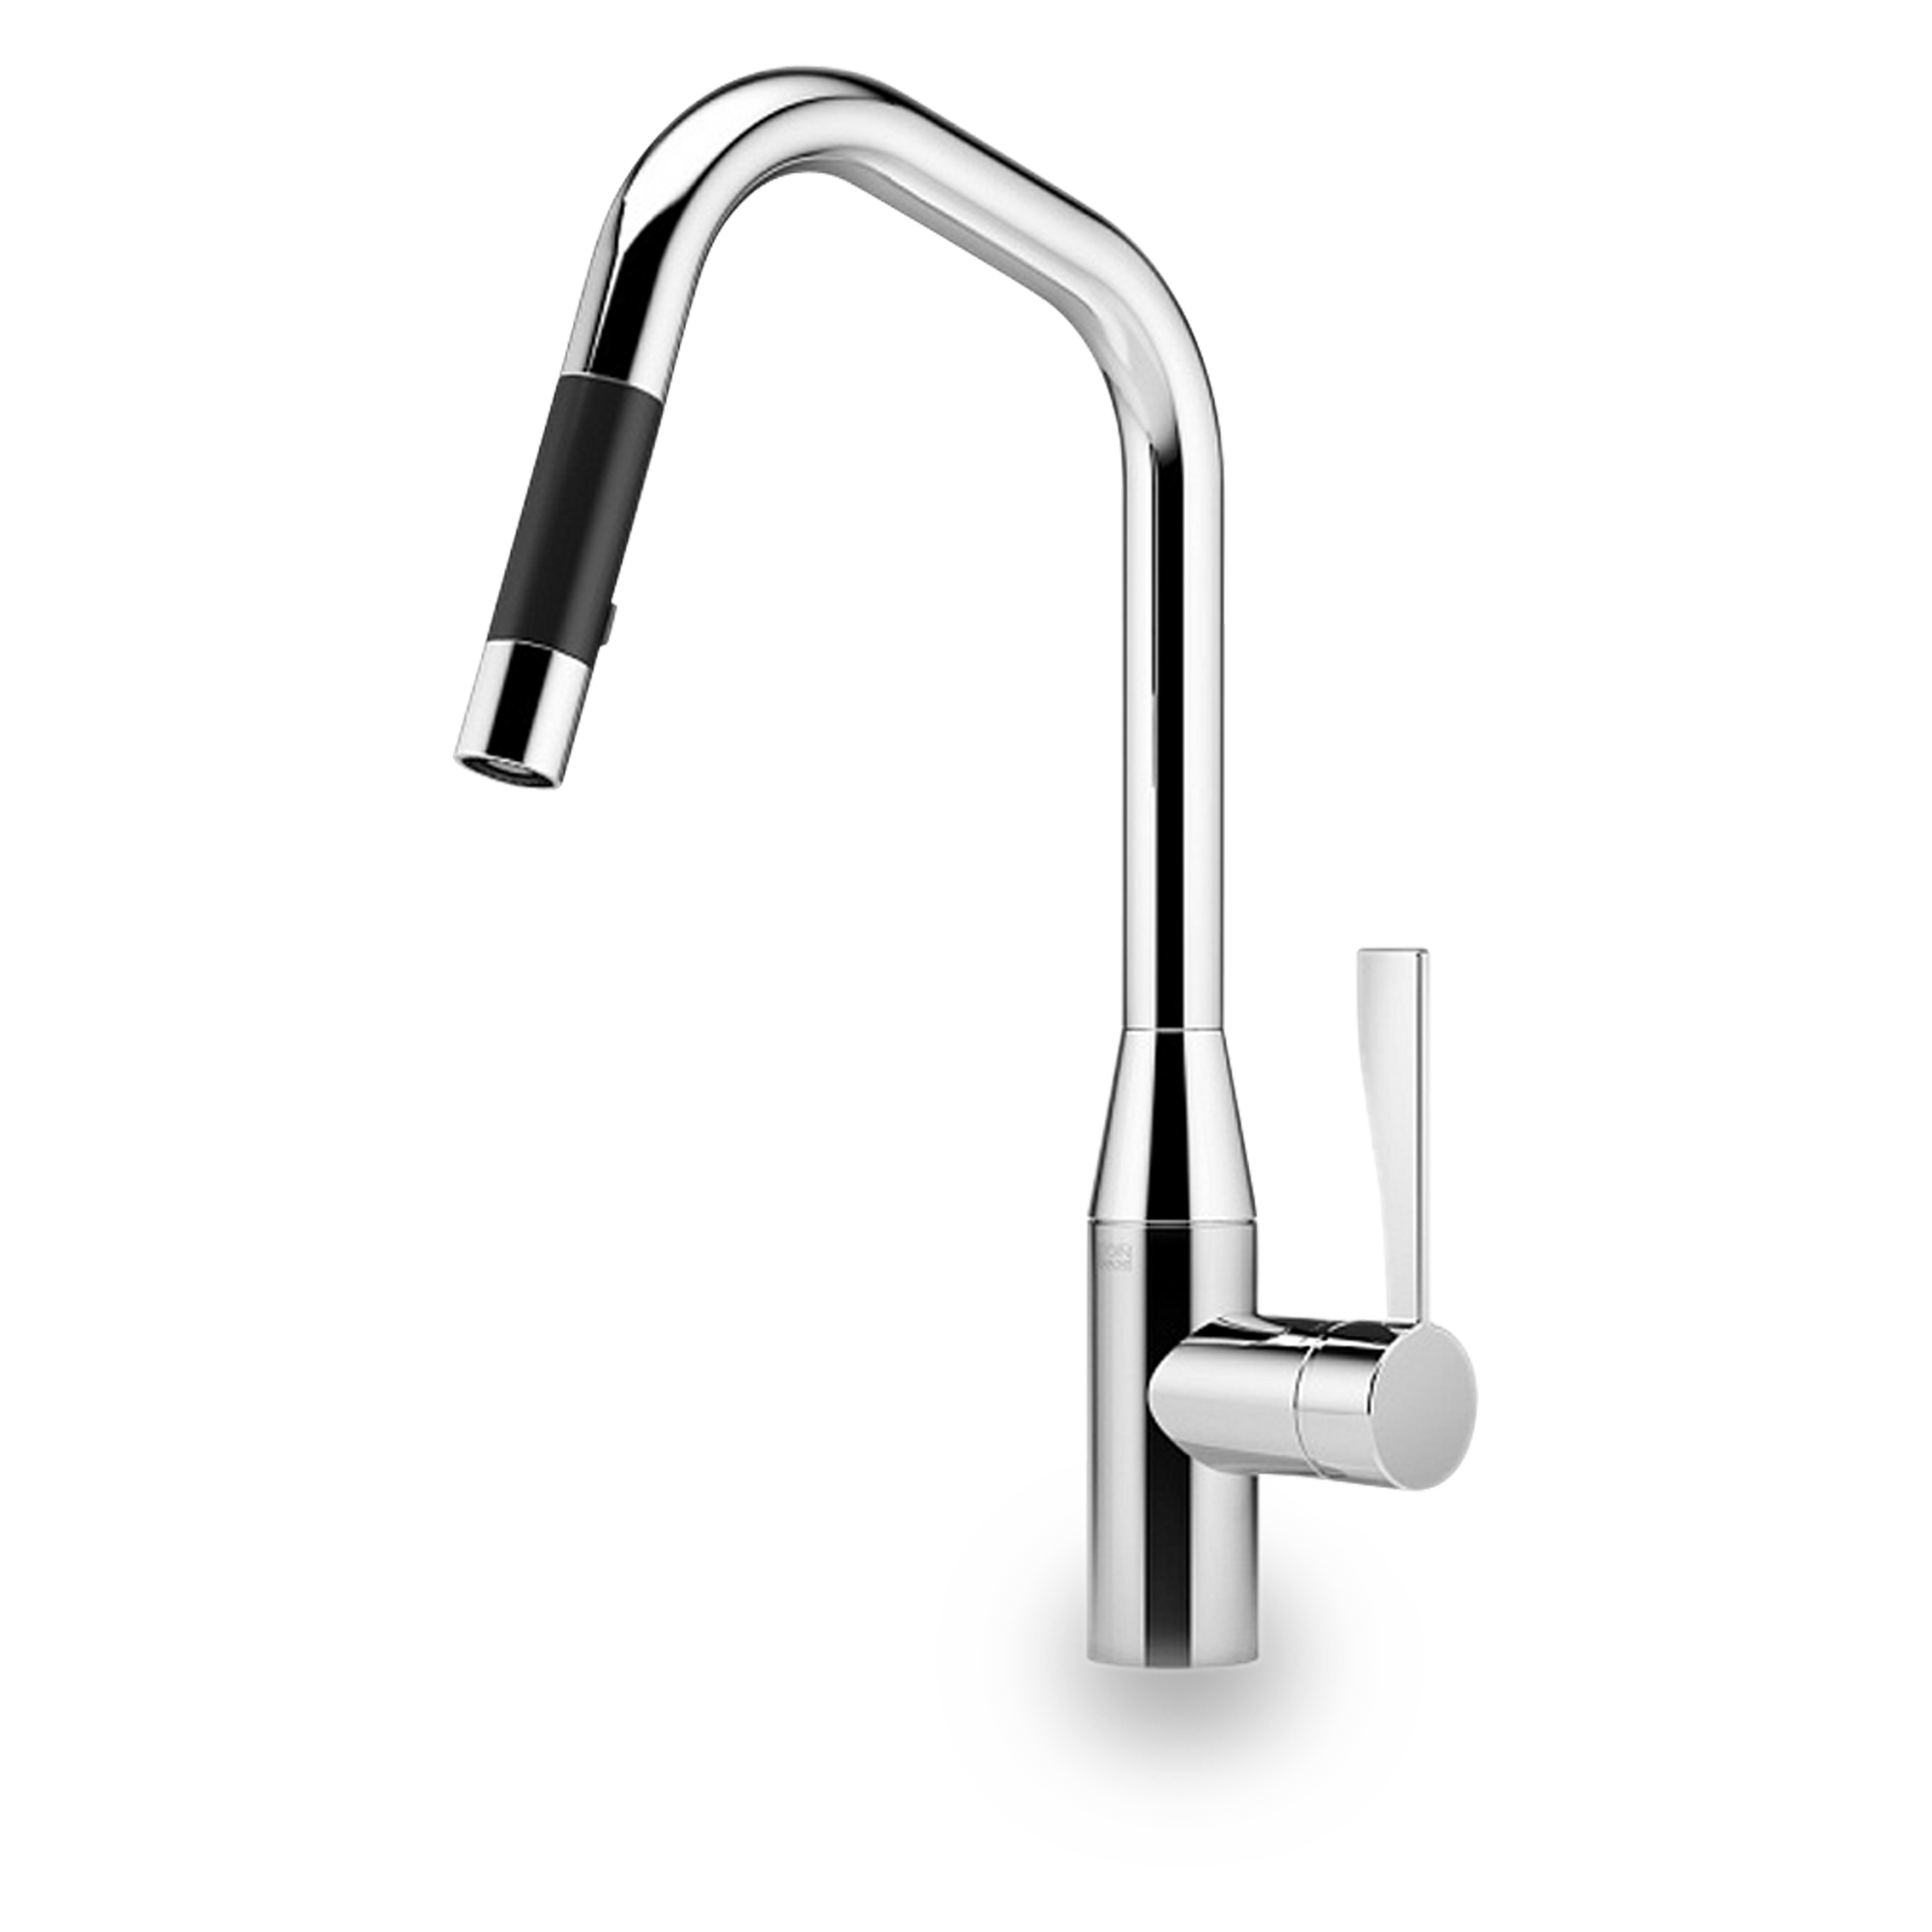 The Dornbracht Sync D Faucet is a single-lever mixer pull-down with spray function.